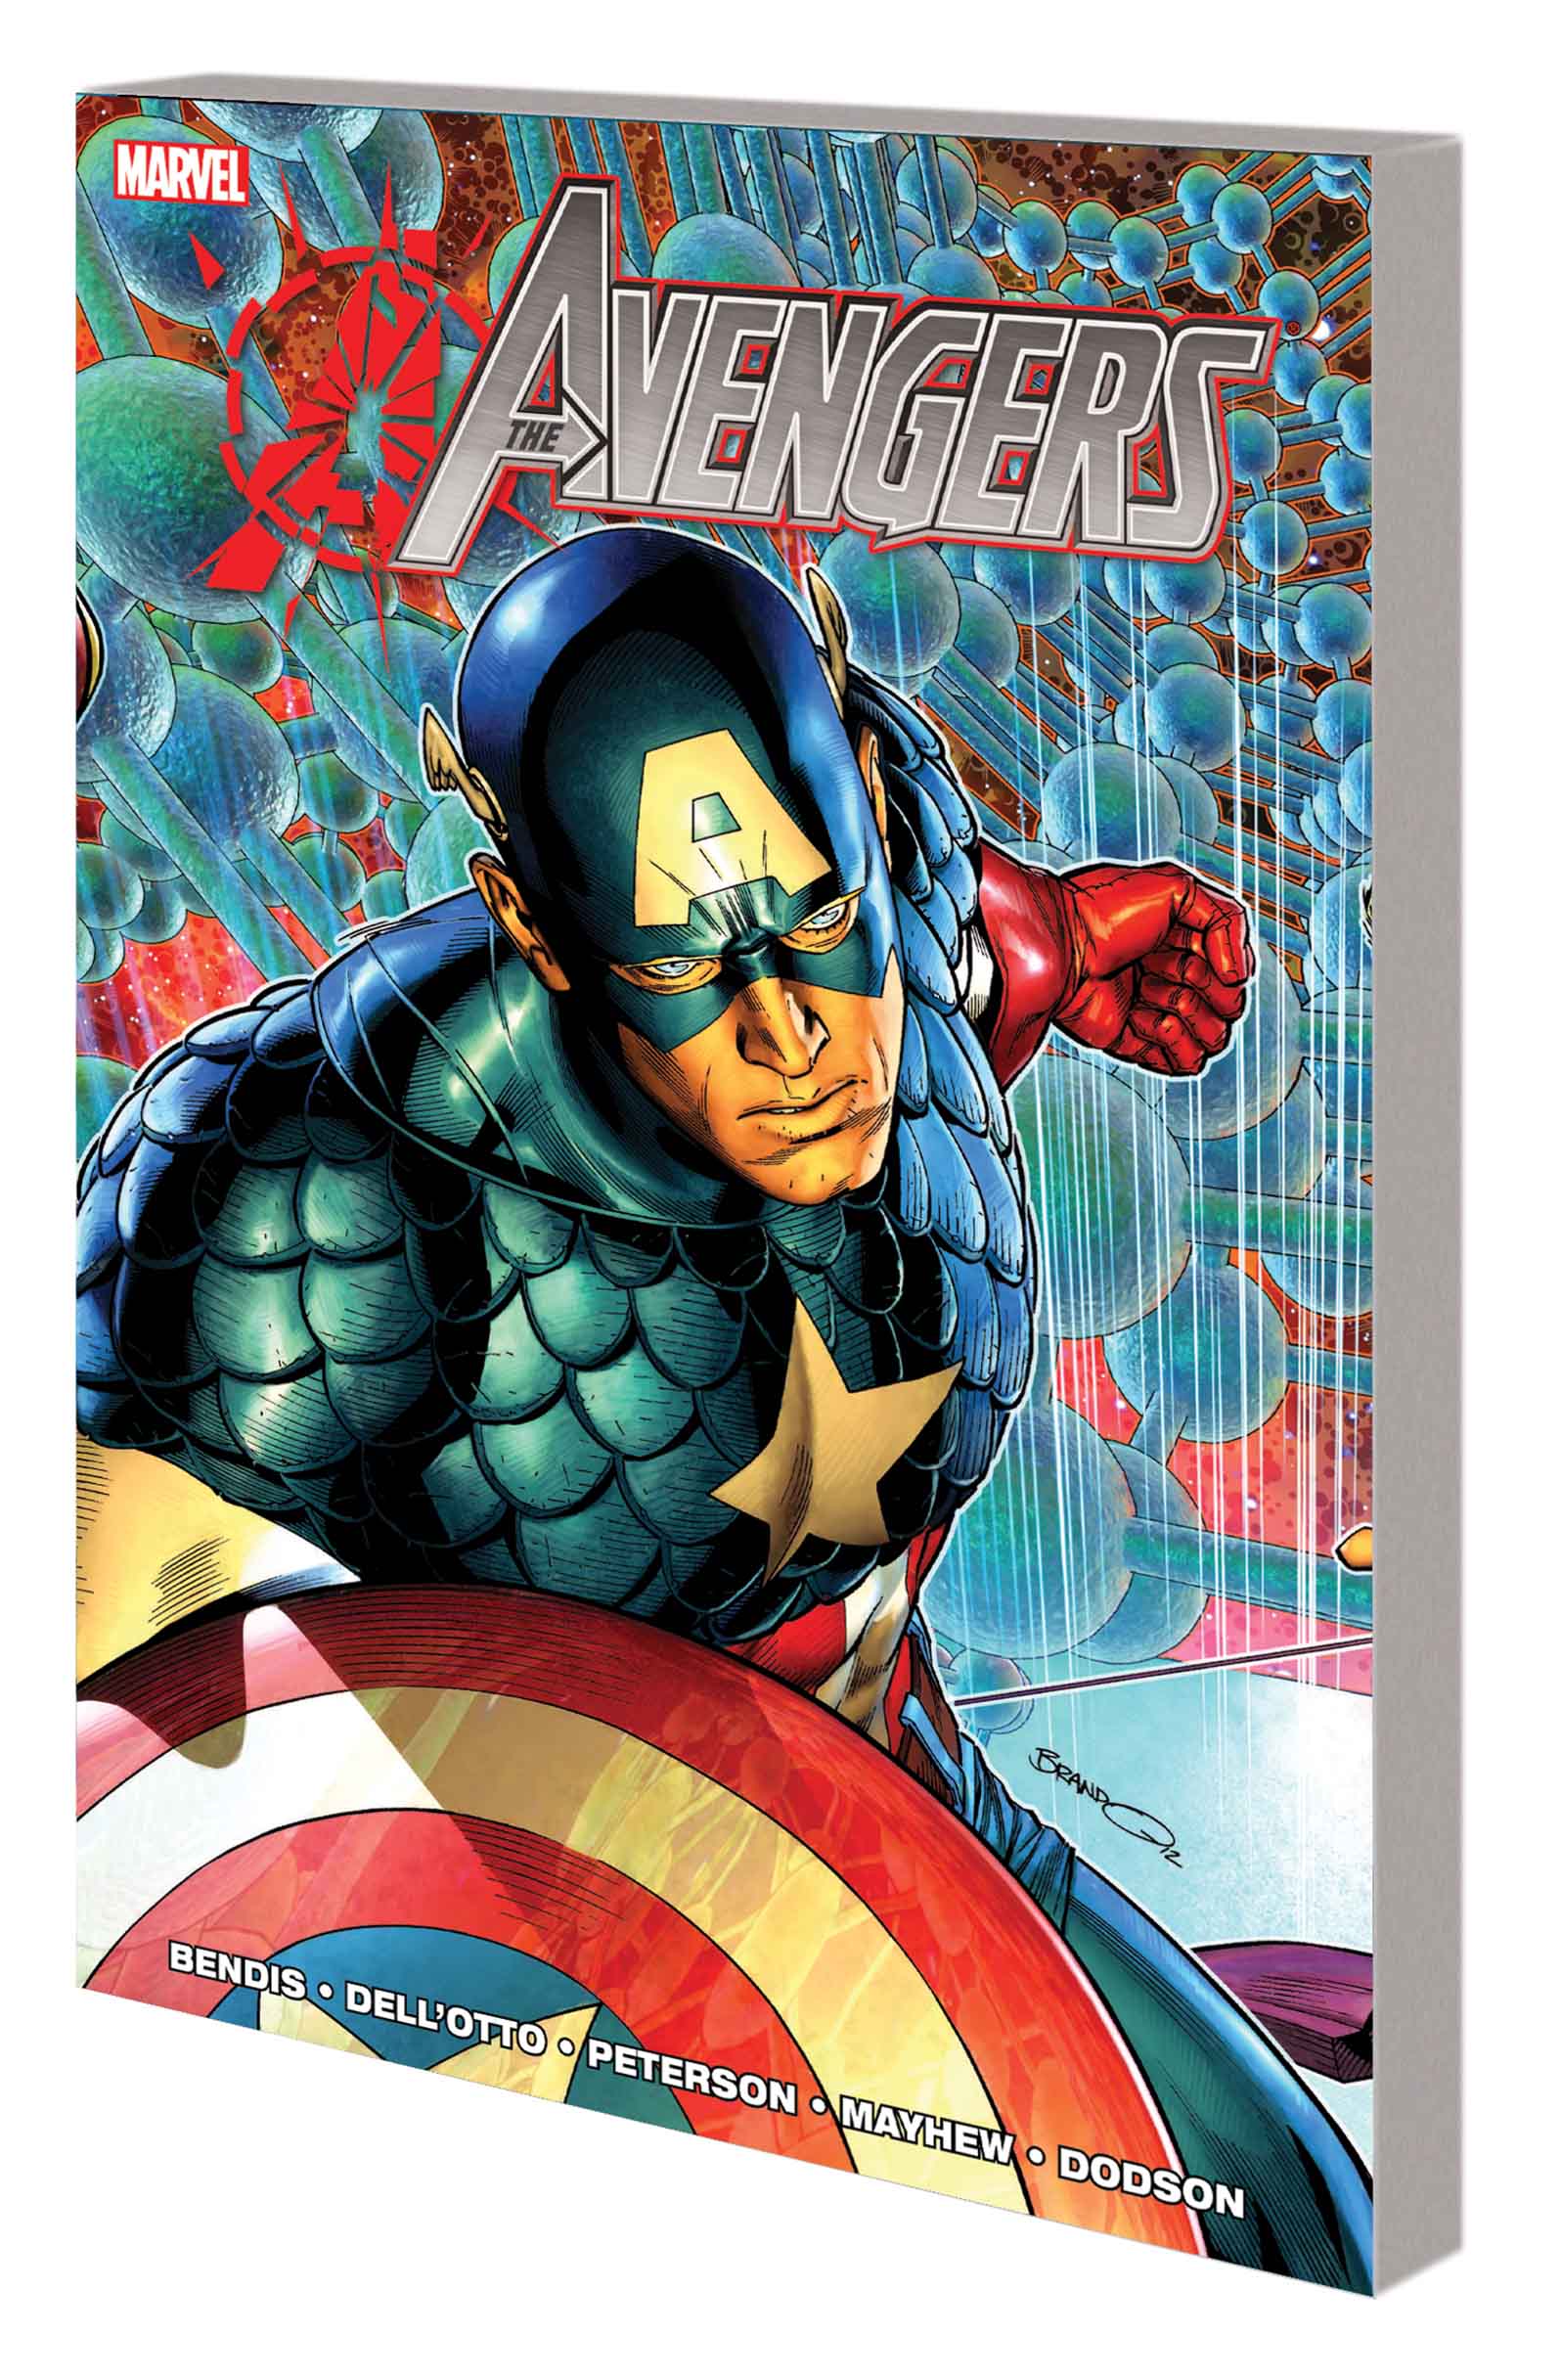 AVENGERS BY BRIAN MICHAEL BENDIS VOL. 5 (Trade Paperback)